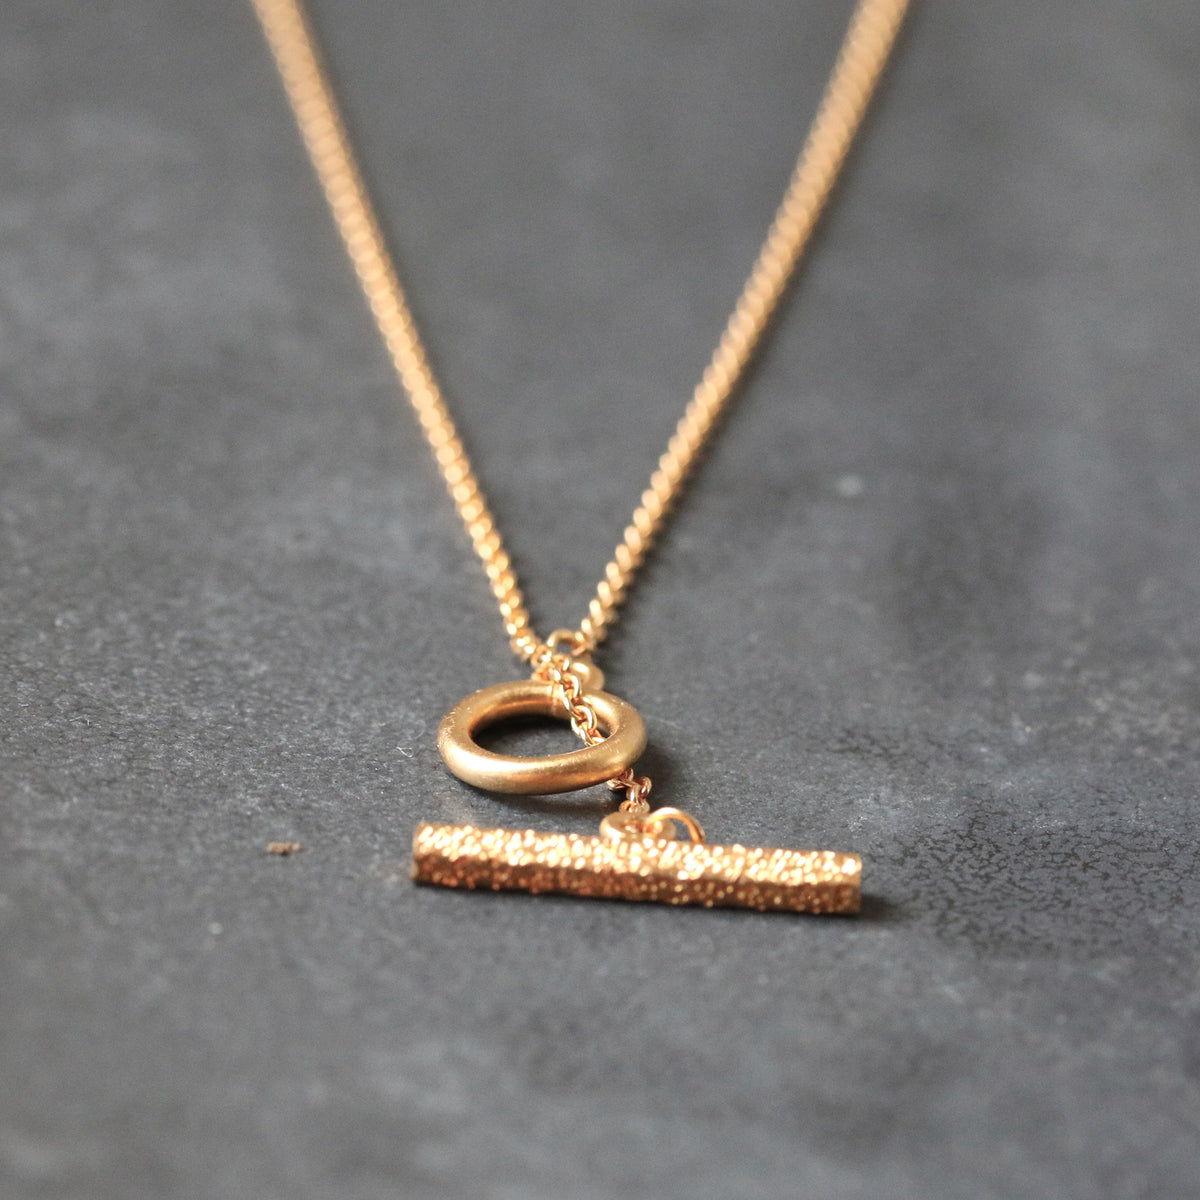 DIAMOND DUSTED MERIDIAN NECKLACE